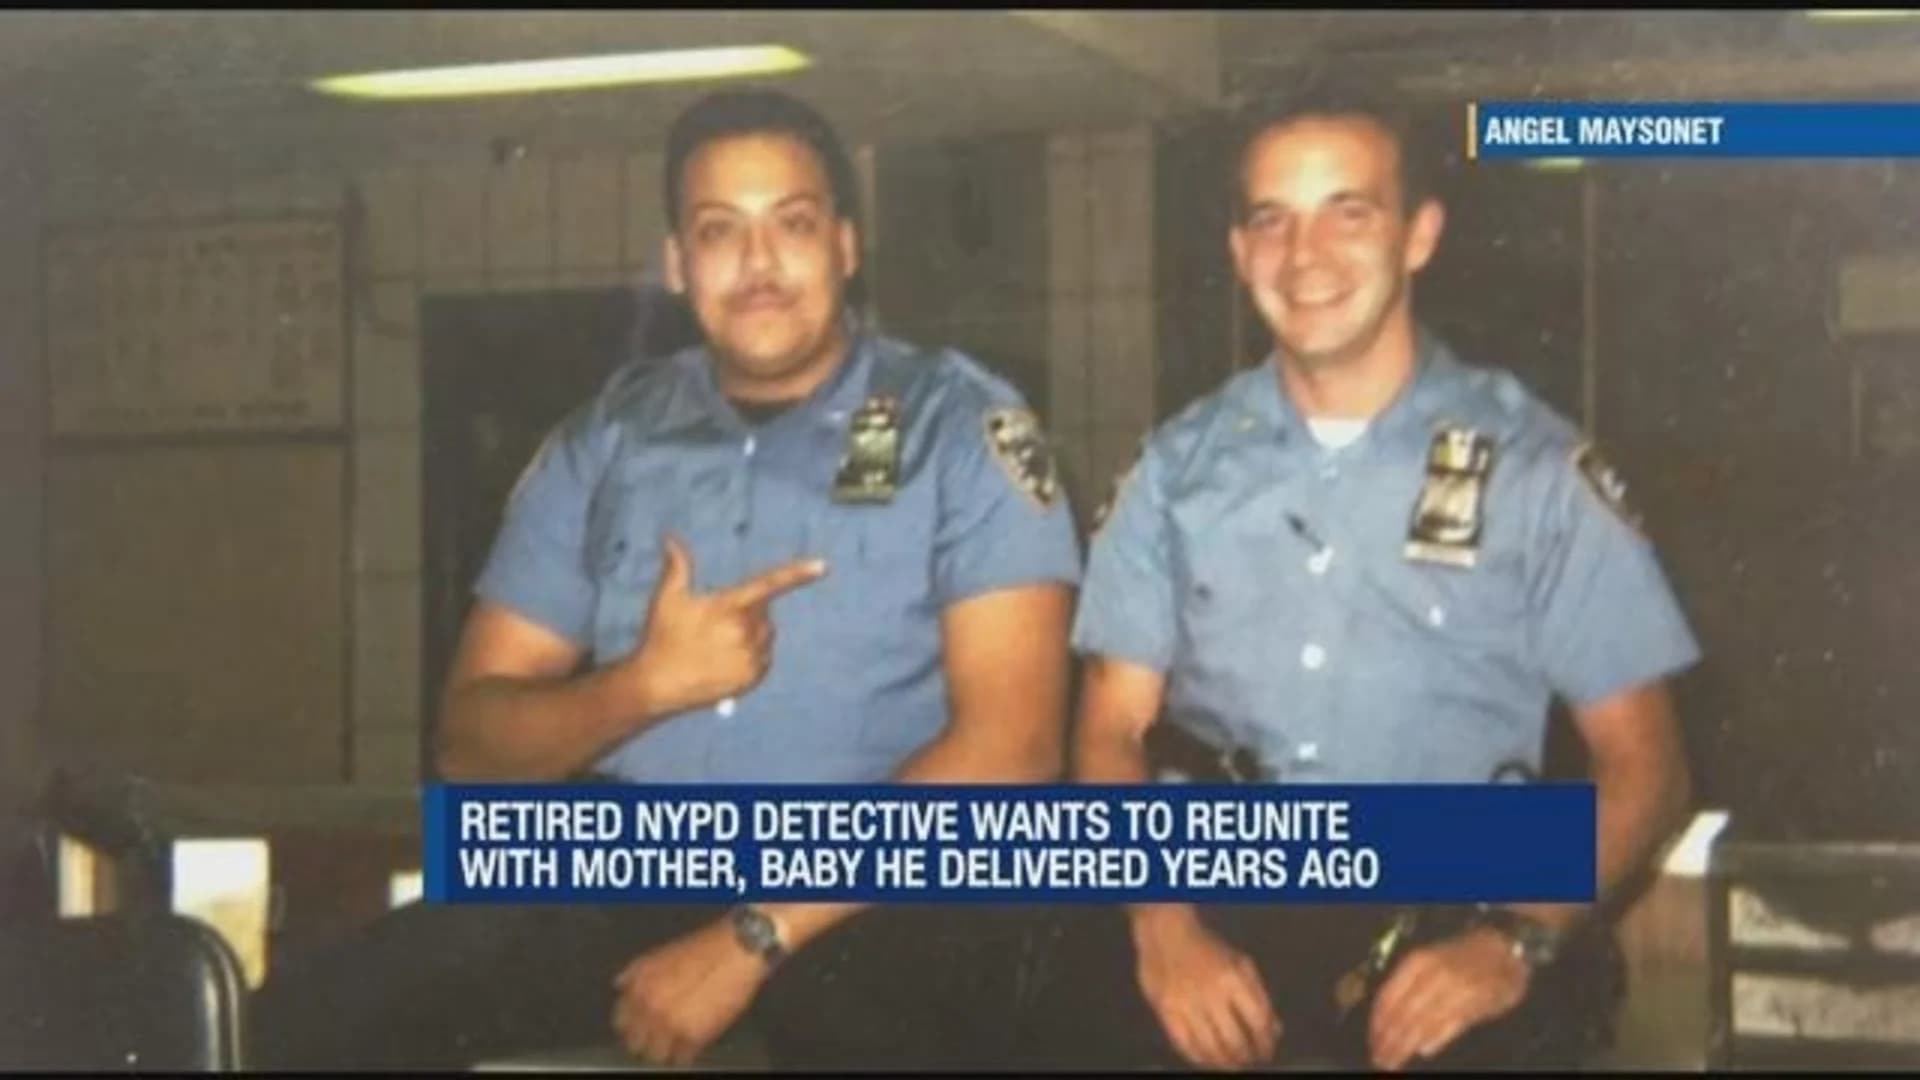 Retired NYPD detective hopes to reunite with mom, baby he helped deliver in 1994